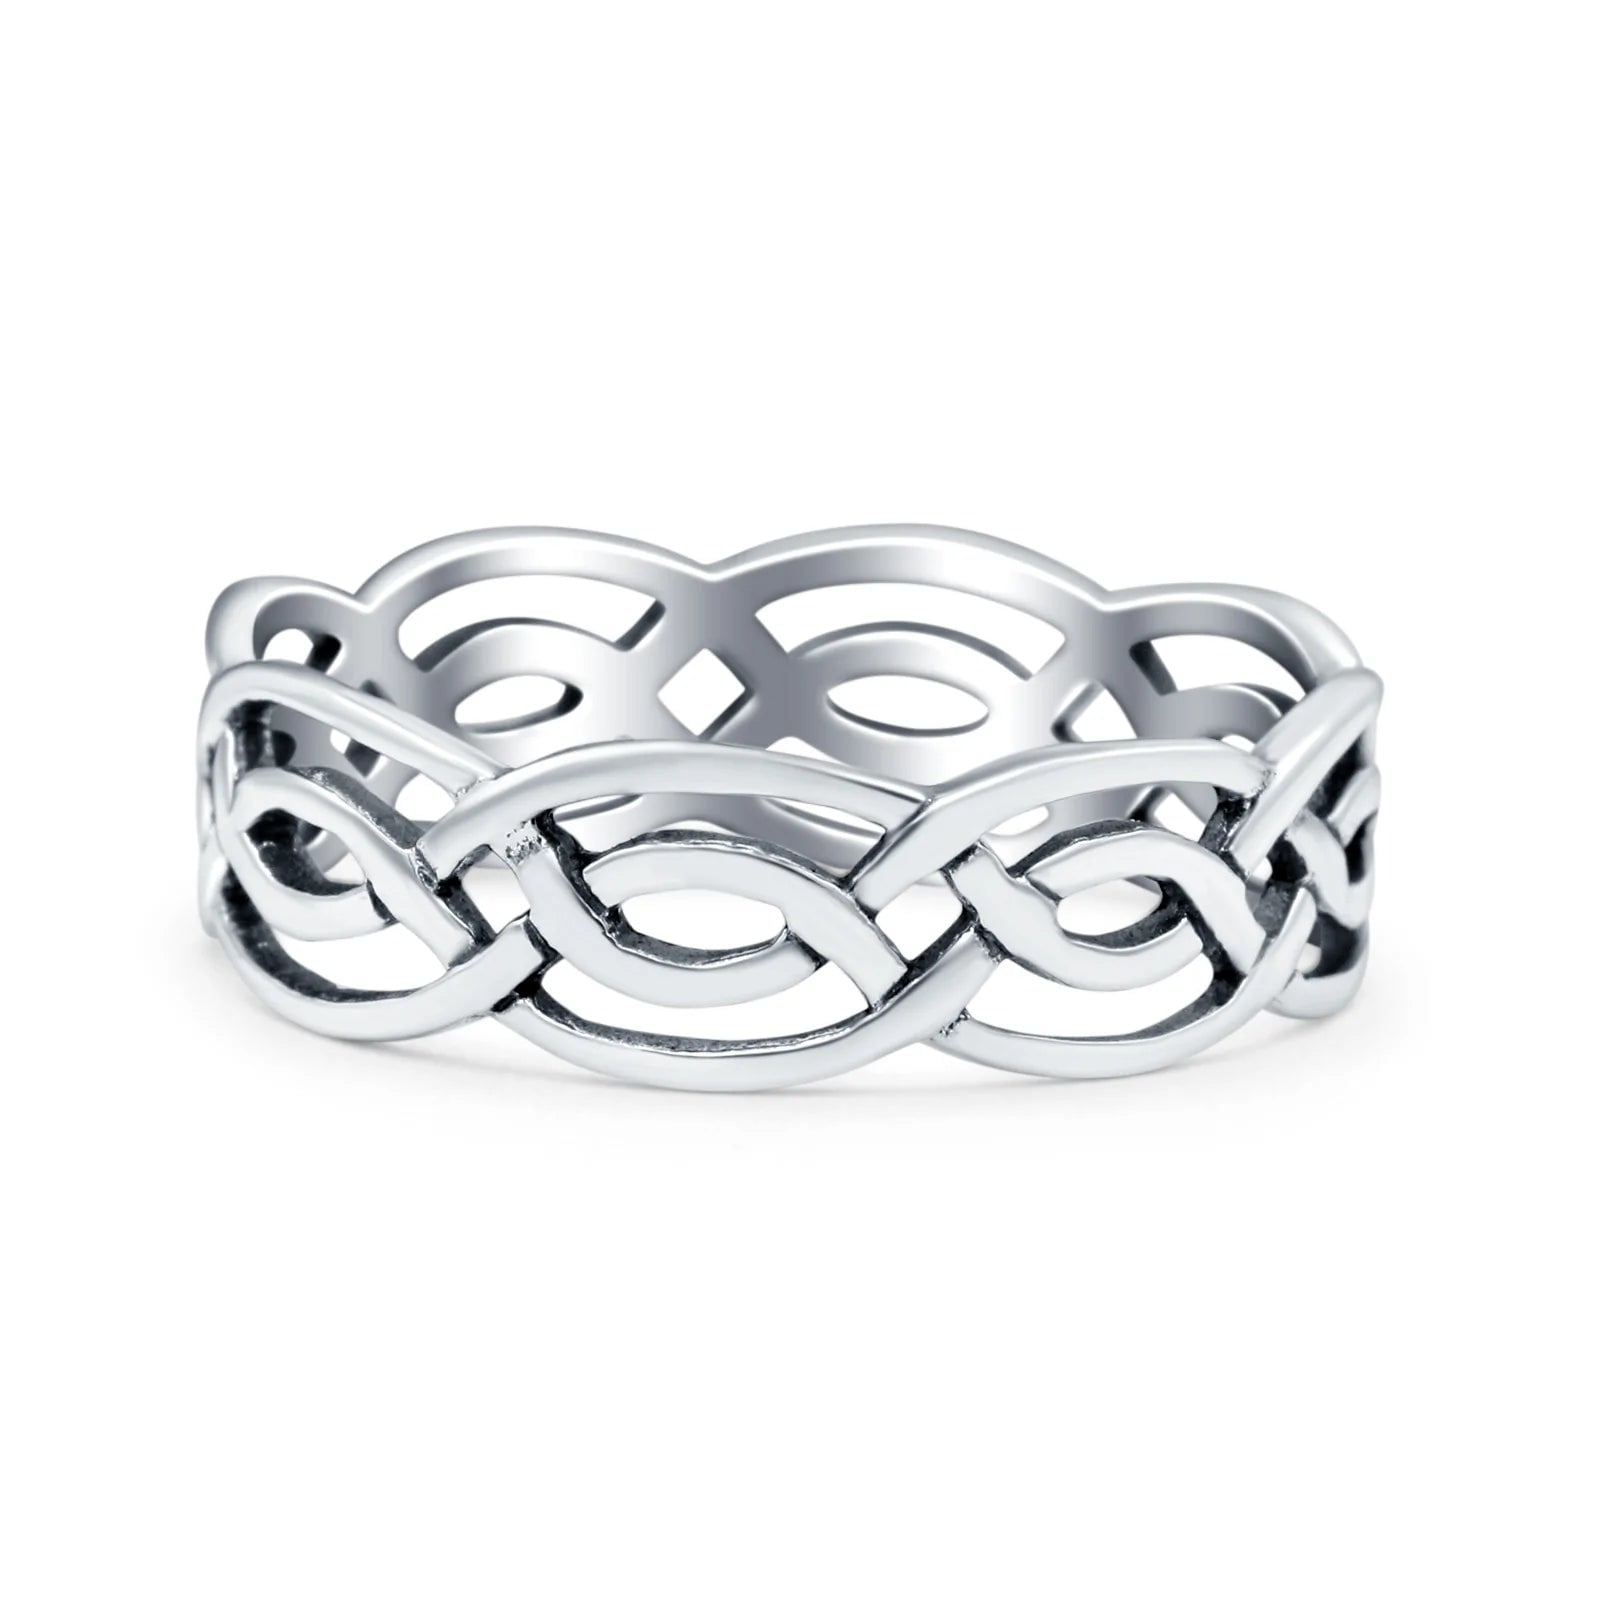 Blue Apple Jewelry Co. Celtic 9 Thumb Size Ring Ring Oxidized Sterling Silver Solid Band (5mm) 925